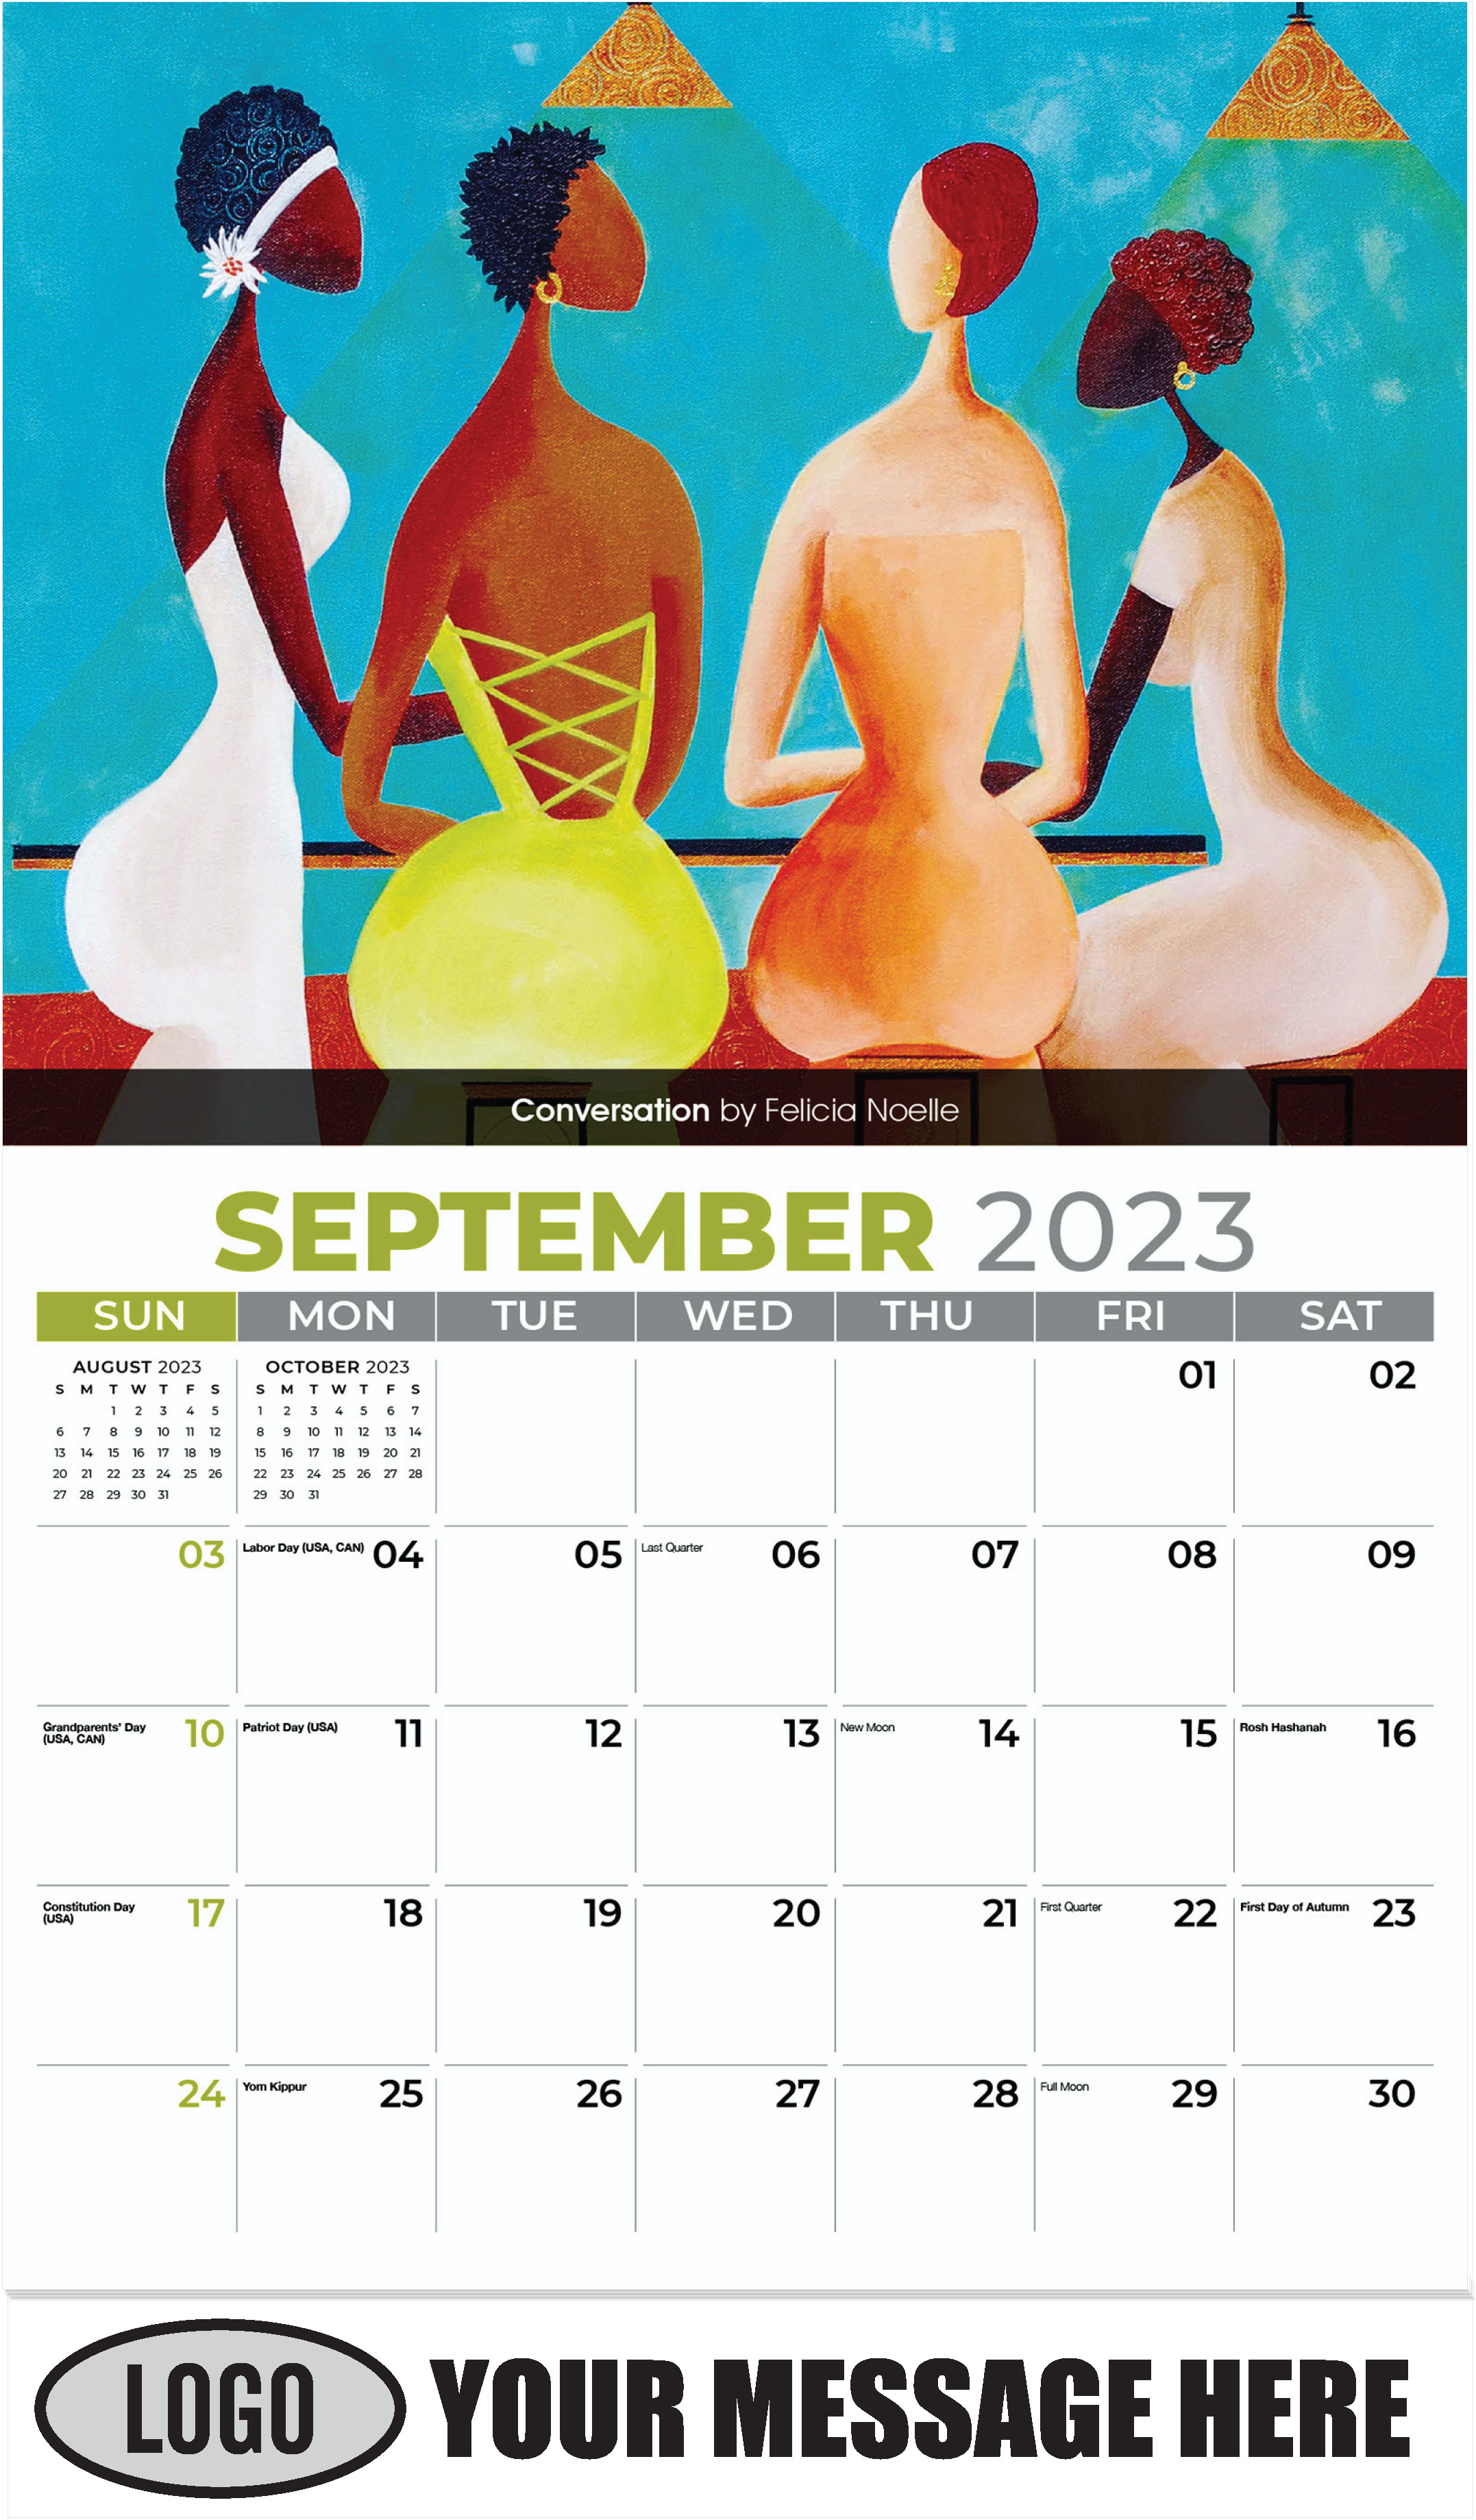 2023 Business Promotion Calendar African American Art low as 65¢